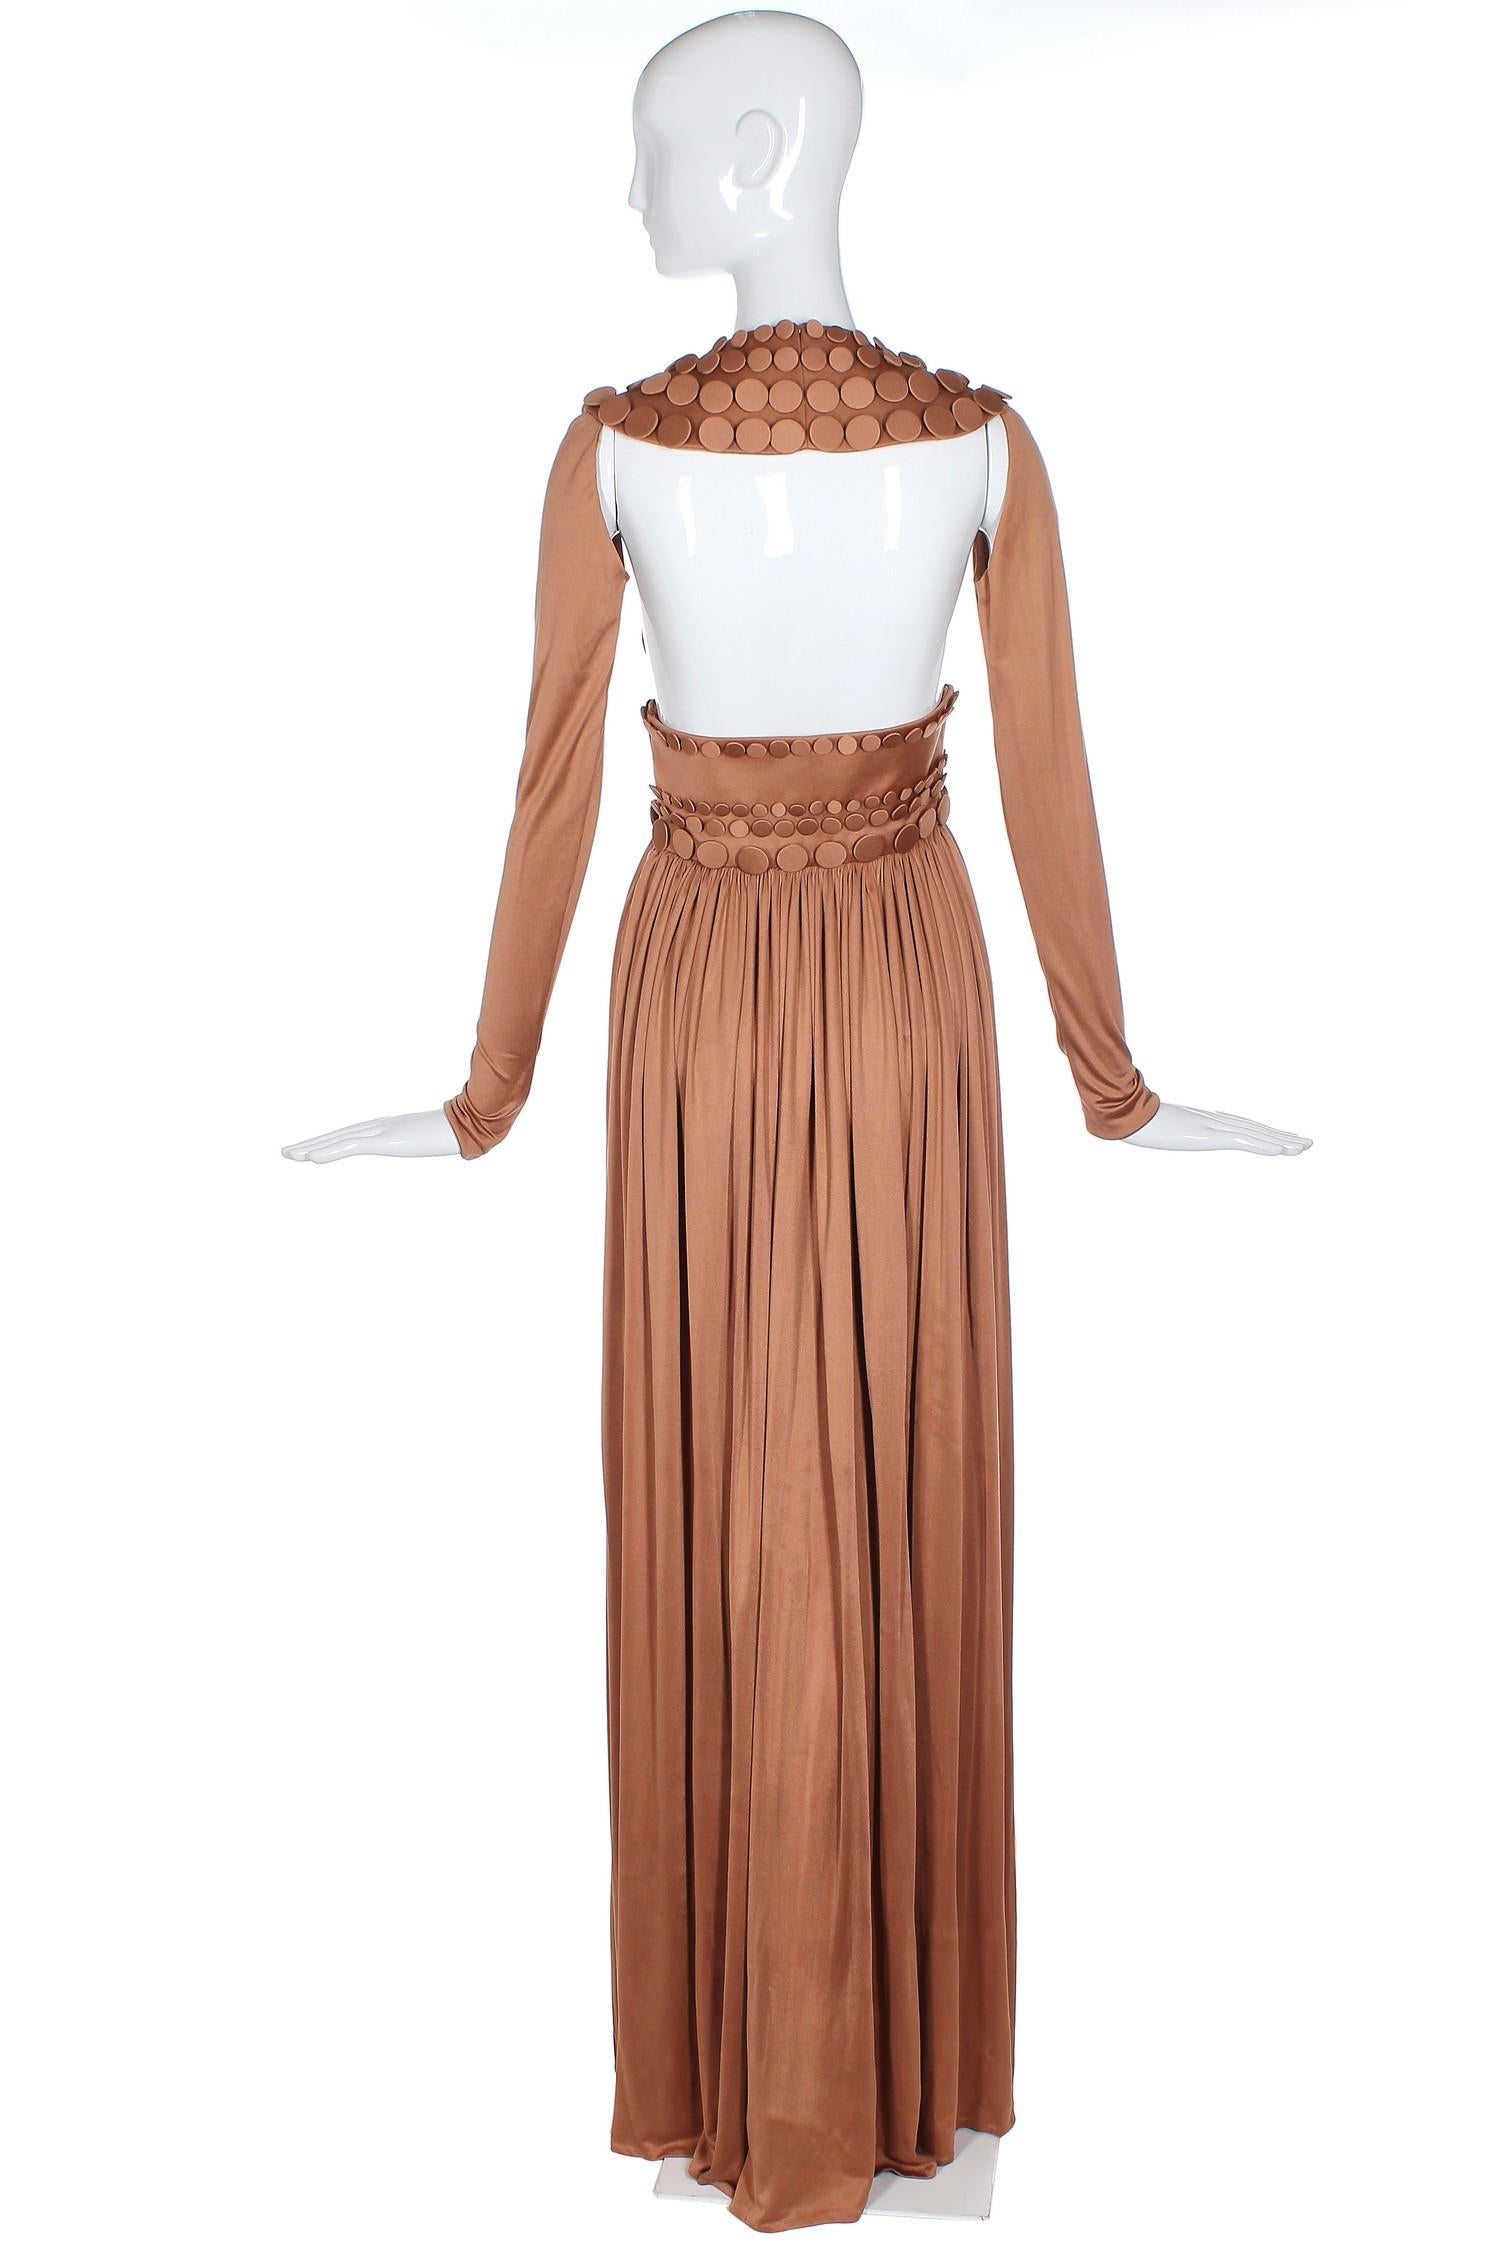 Jean-Louis Scherrer caramel-colored haute couture runway sample gown from Sprint Summer 2007. In very good to excellent condition with some scattered hard to see marks on the skirt. Please see measurements.
MEASUREMENTS:
Bust - 28